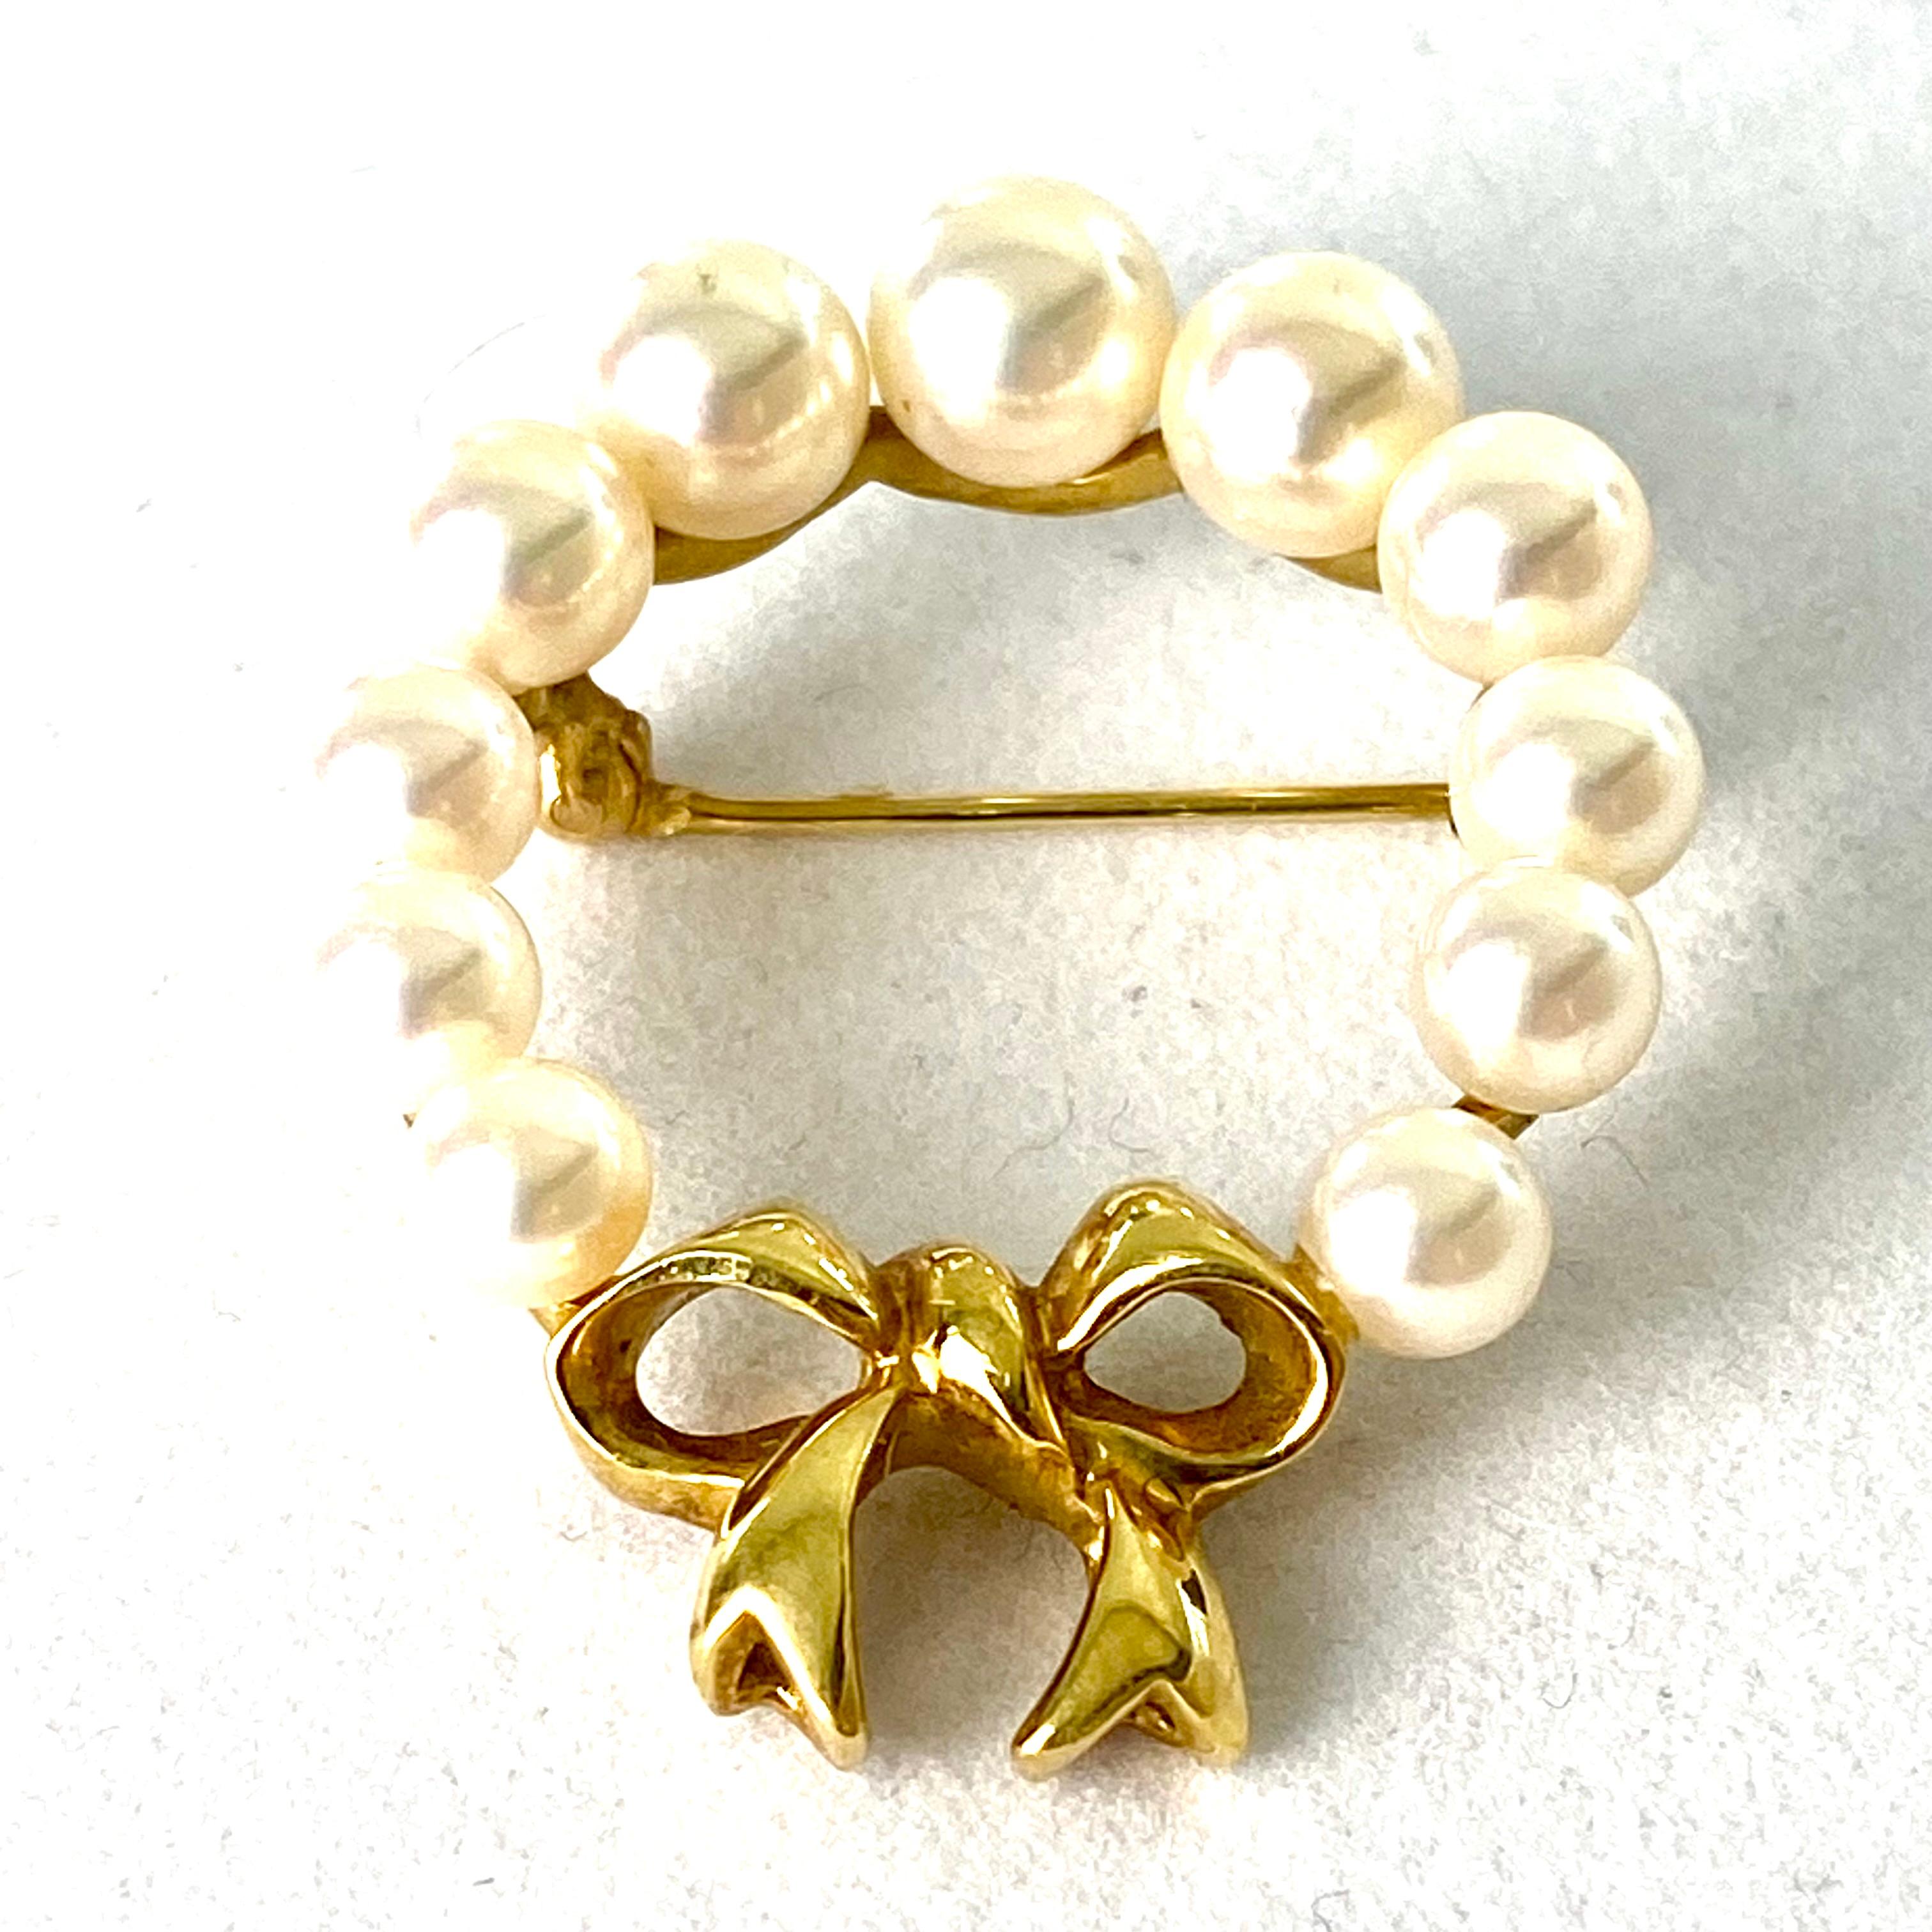 Tiffany & Co. Vintage Rare 18 Karat Gold Pearl Bow 1.35 by 1.05 Inch Brooch  1